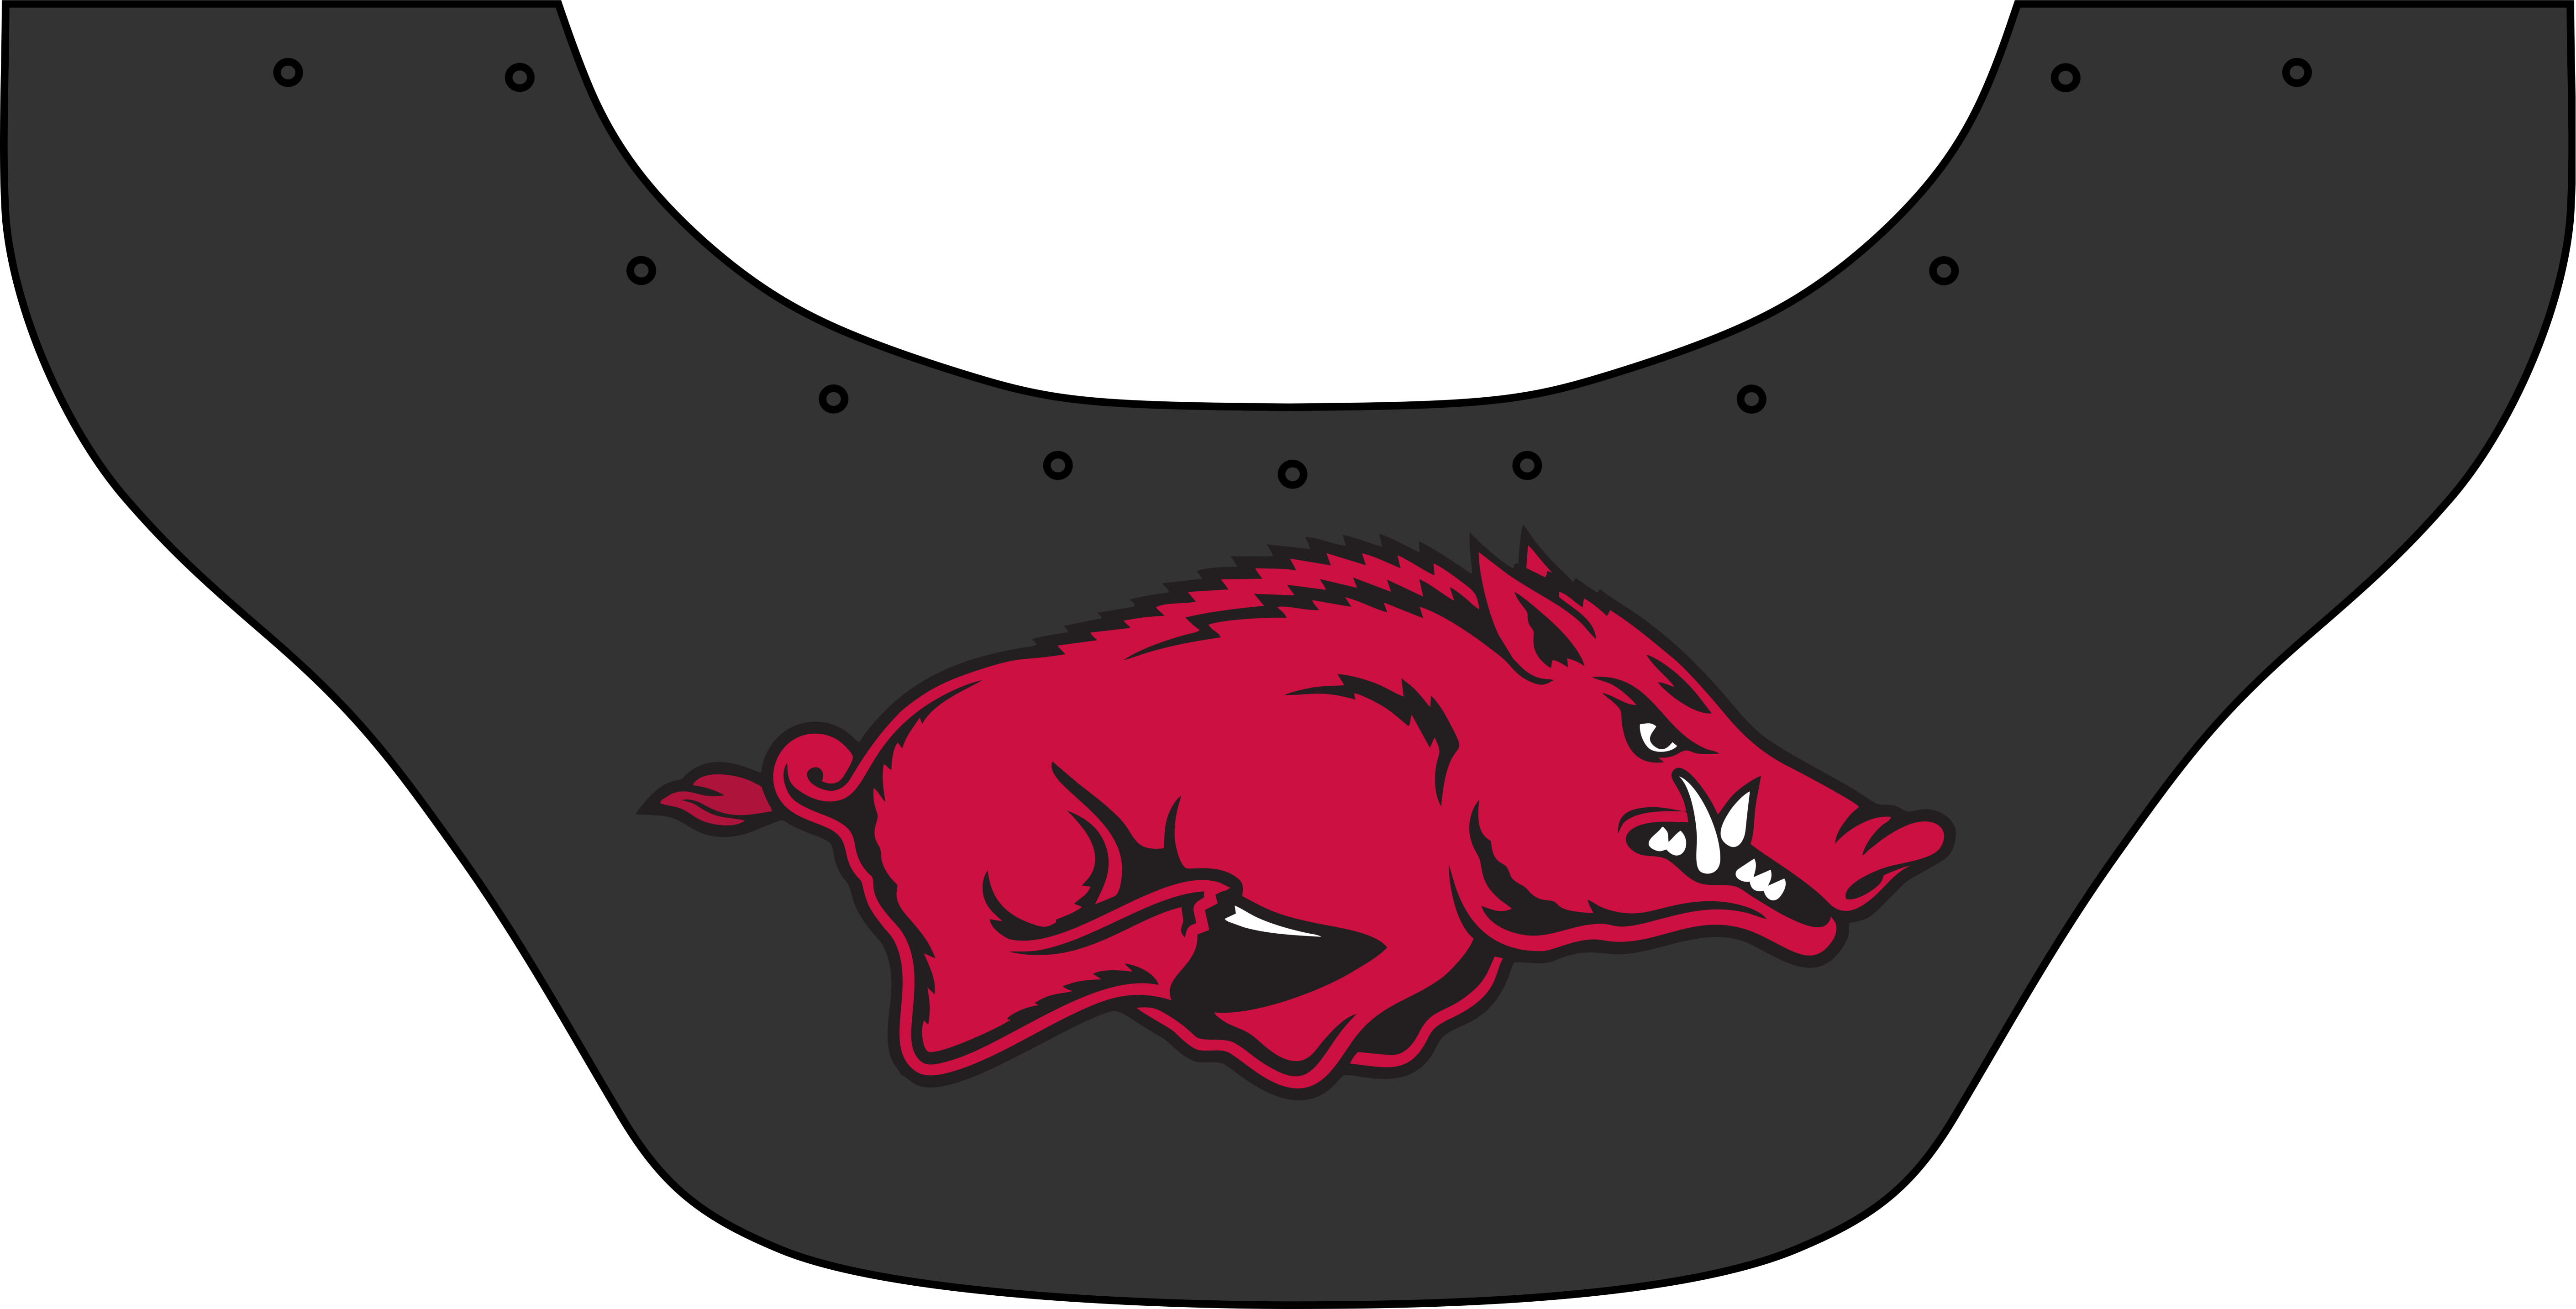 Woo Pig Bib  by Outlaw Leather